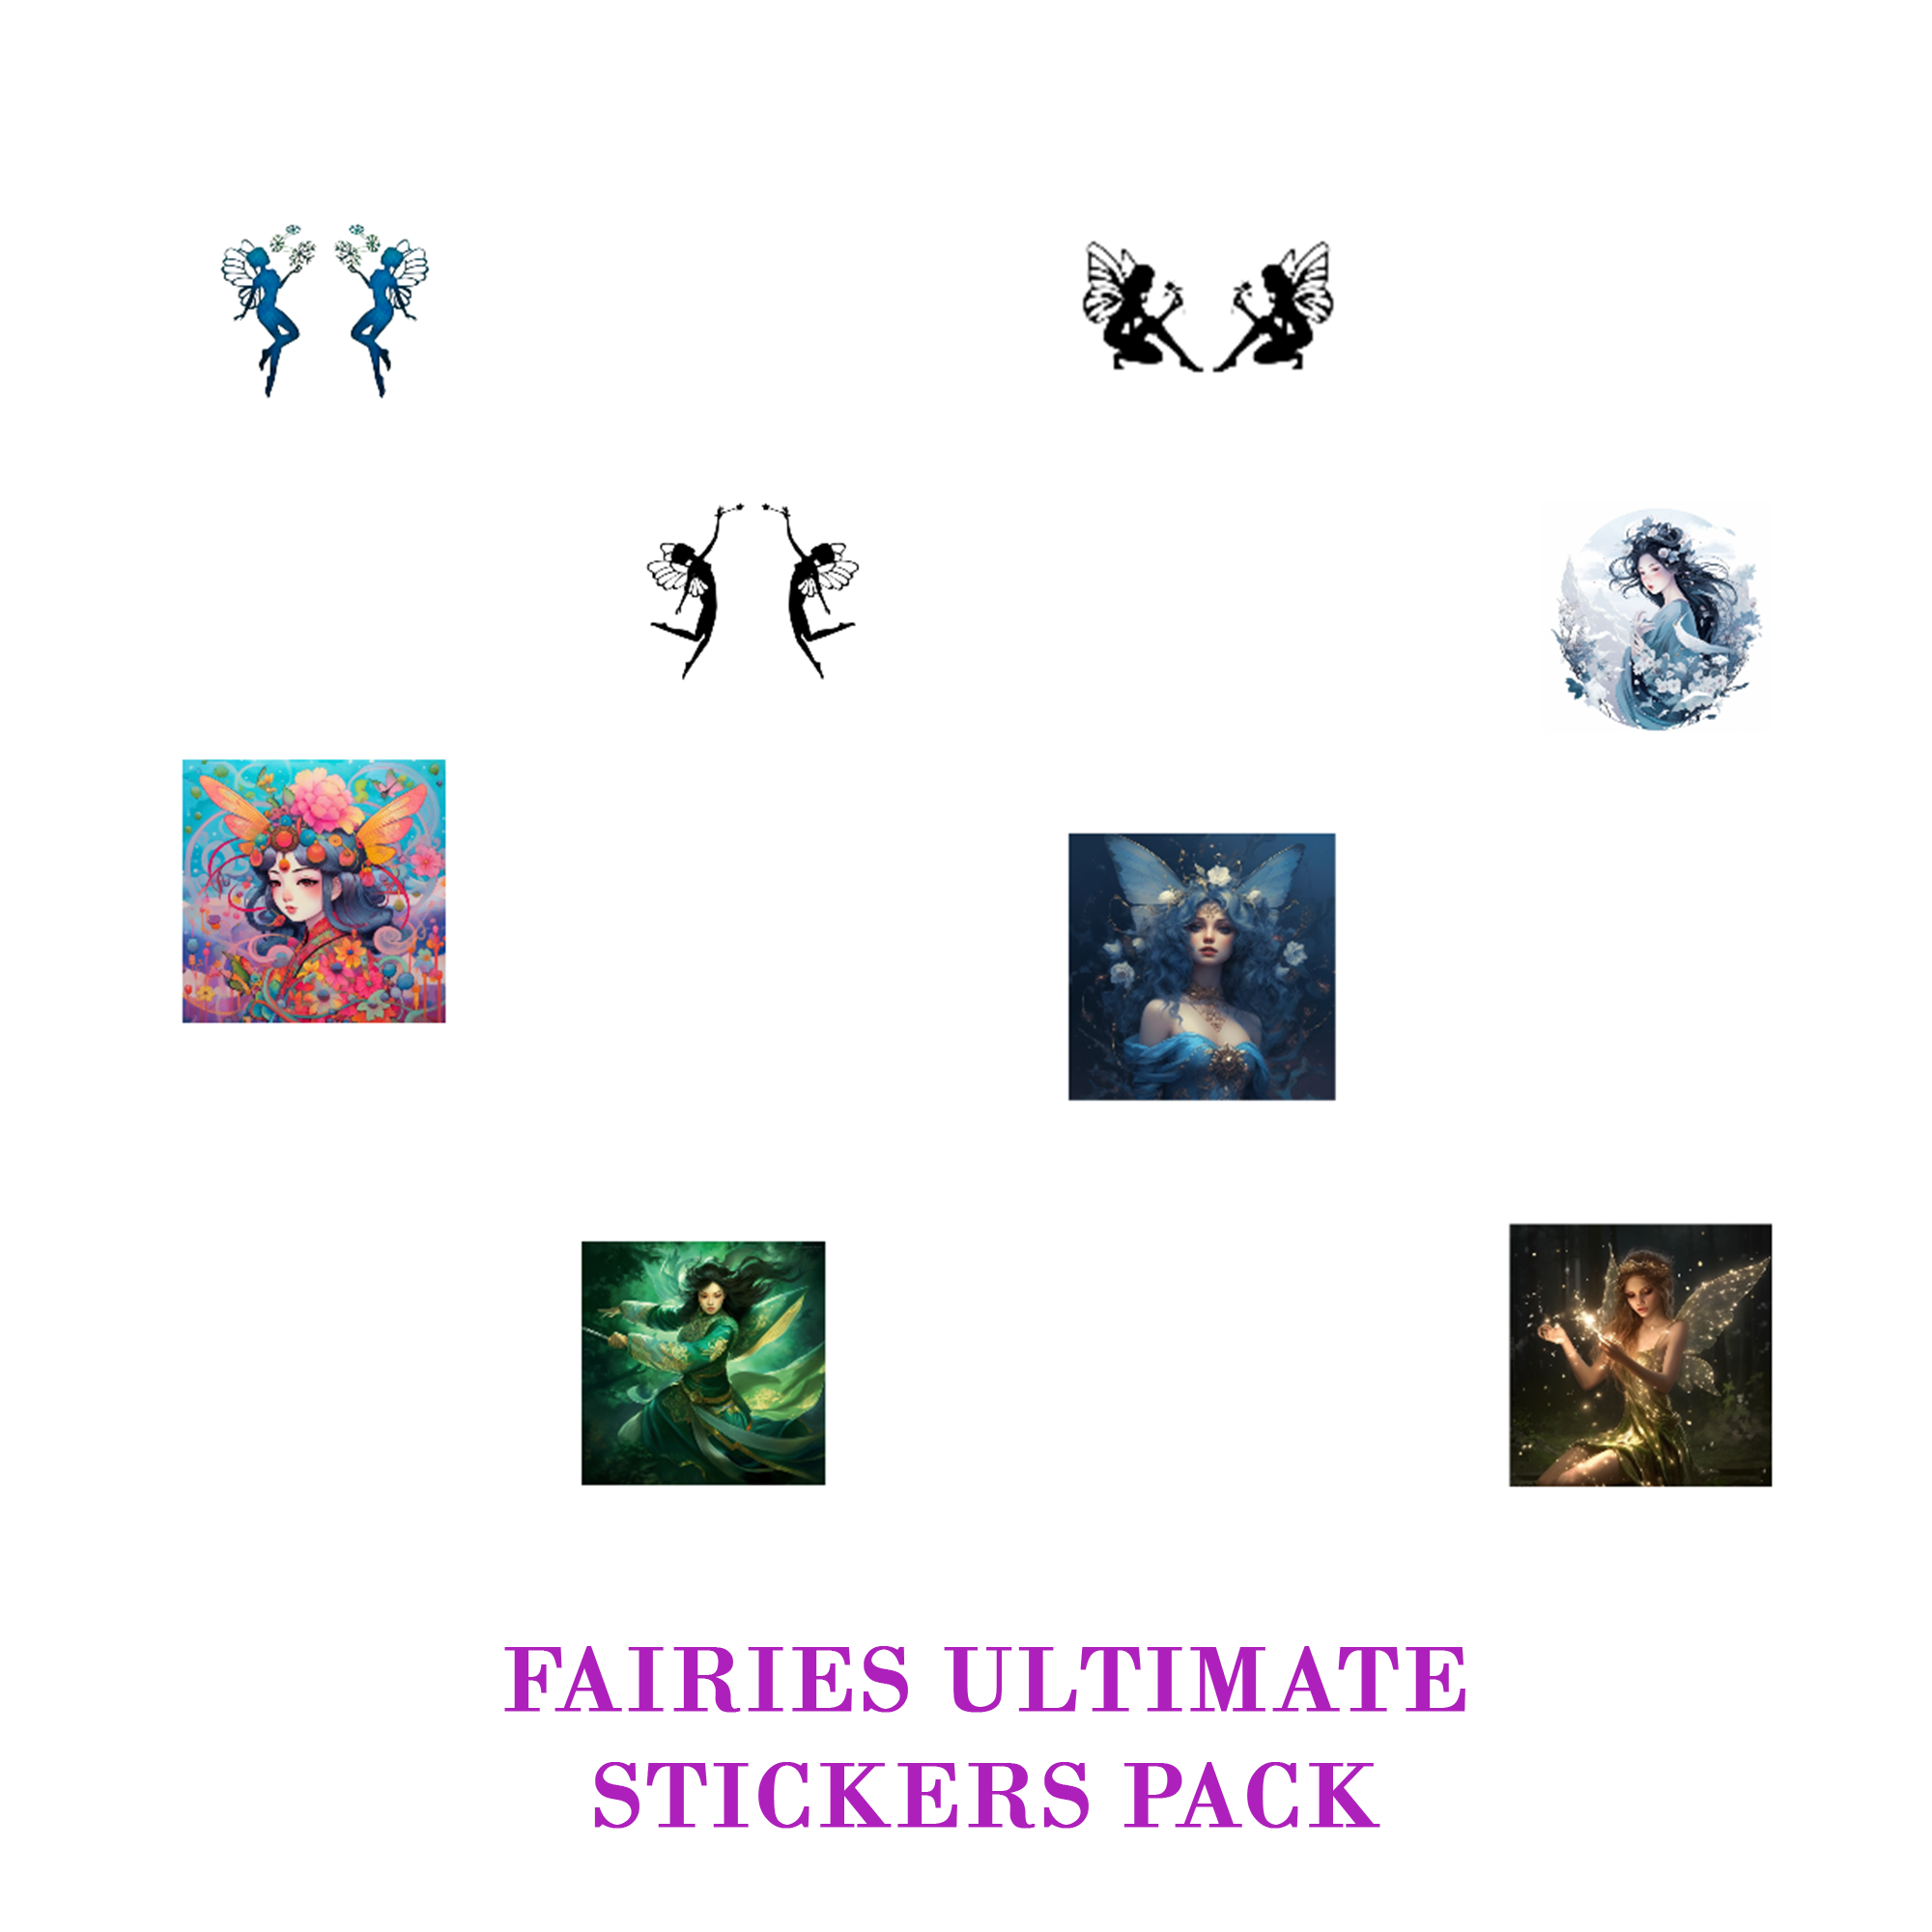 Enchanted Realm Decal Set: 6 Unique Fairy Stickers for Laptop, Mac, Girls Room, Girl's Notebook etc - Sprinkle Magic Everywhere! | Fairy Stickers | Laptop Stickers | Mac Stickers